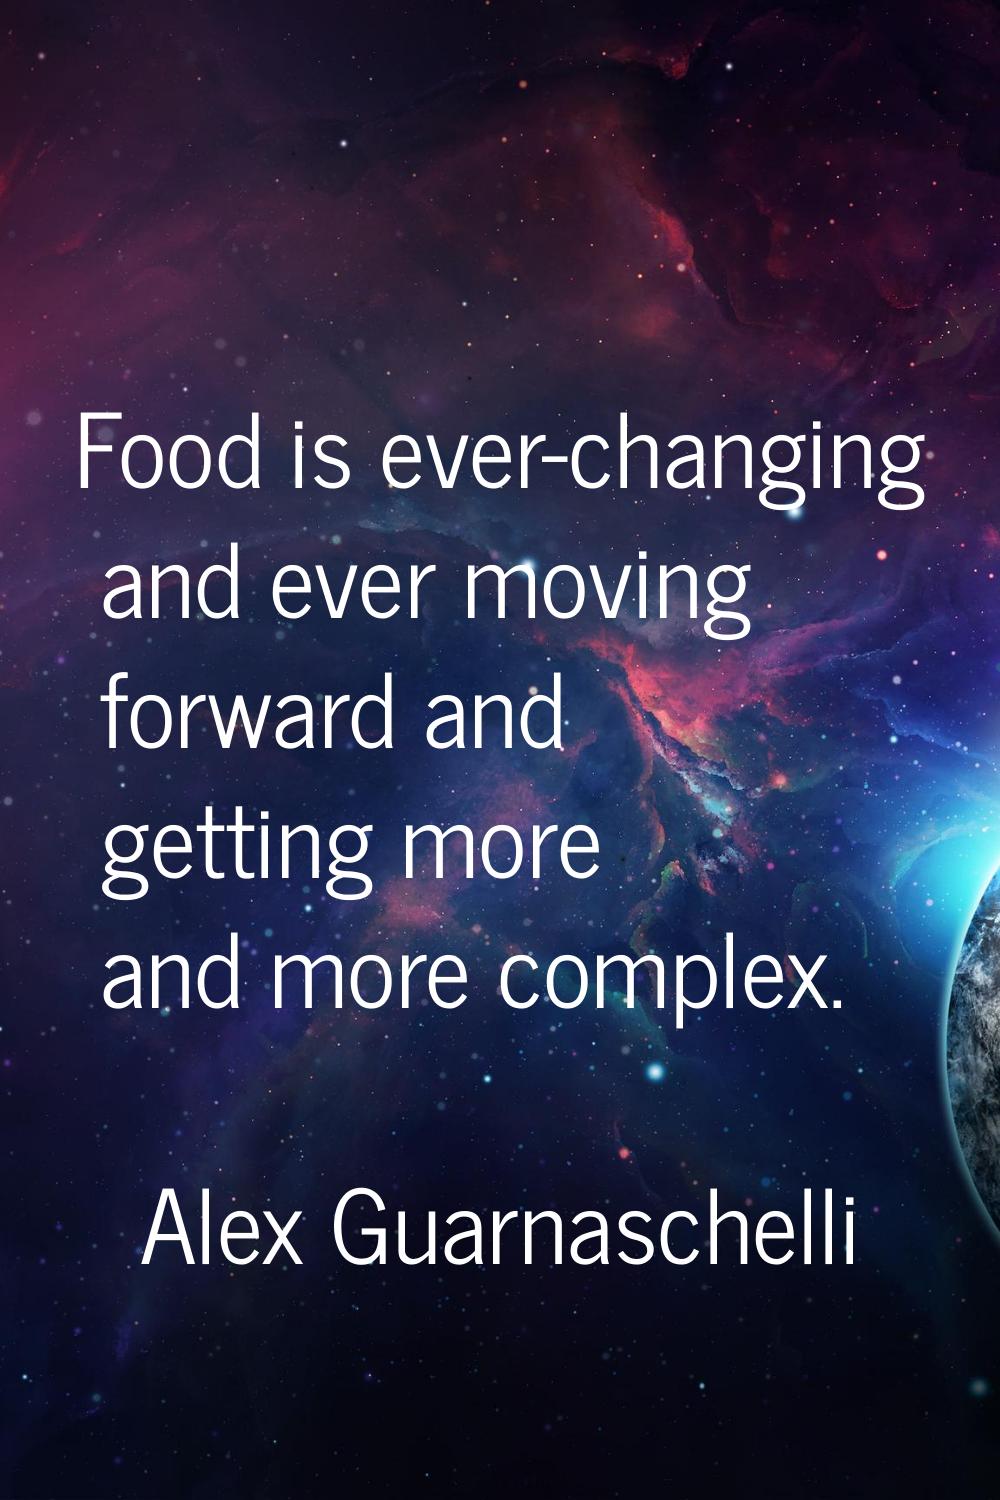 Food is ever-changing and ever moving forward and getting more and more complex.